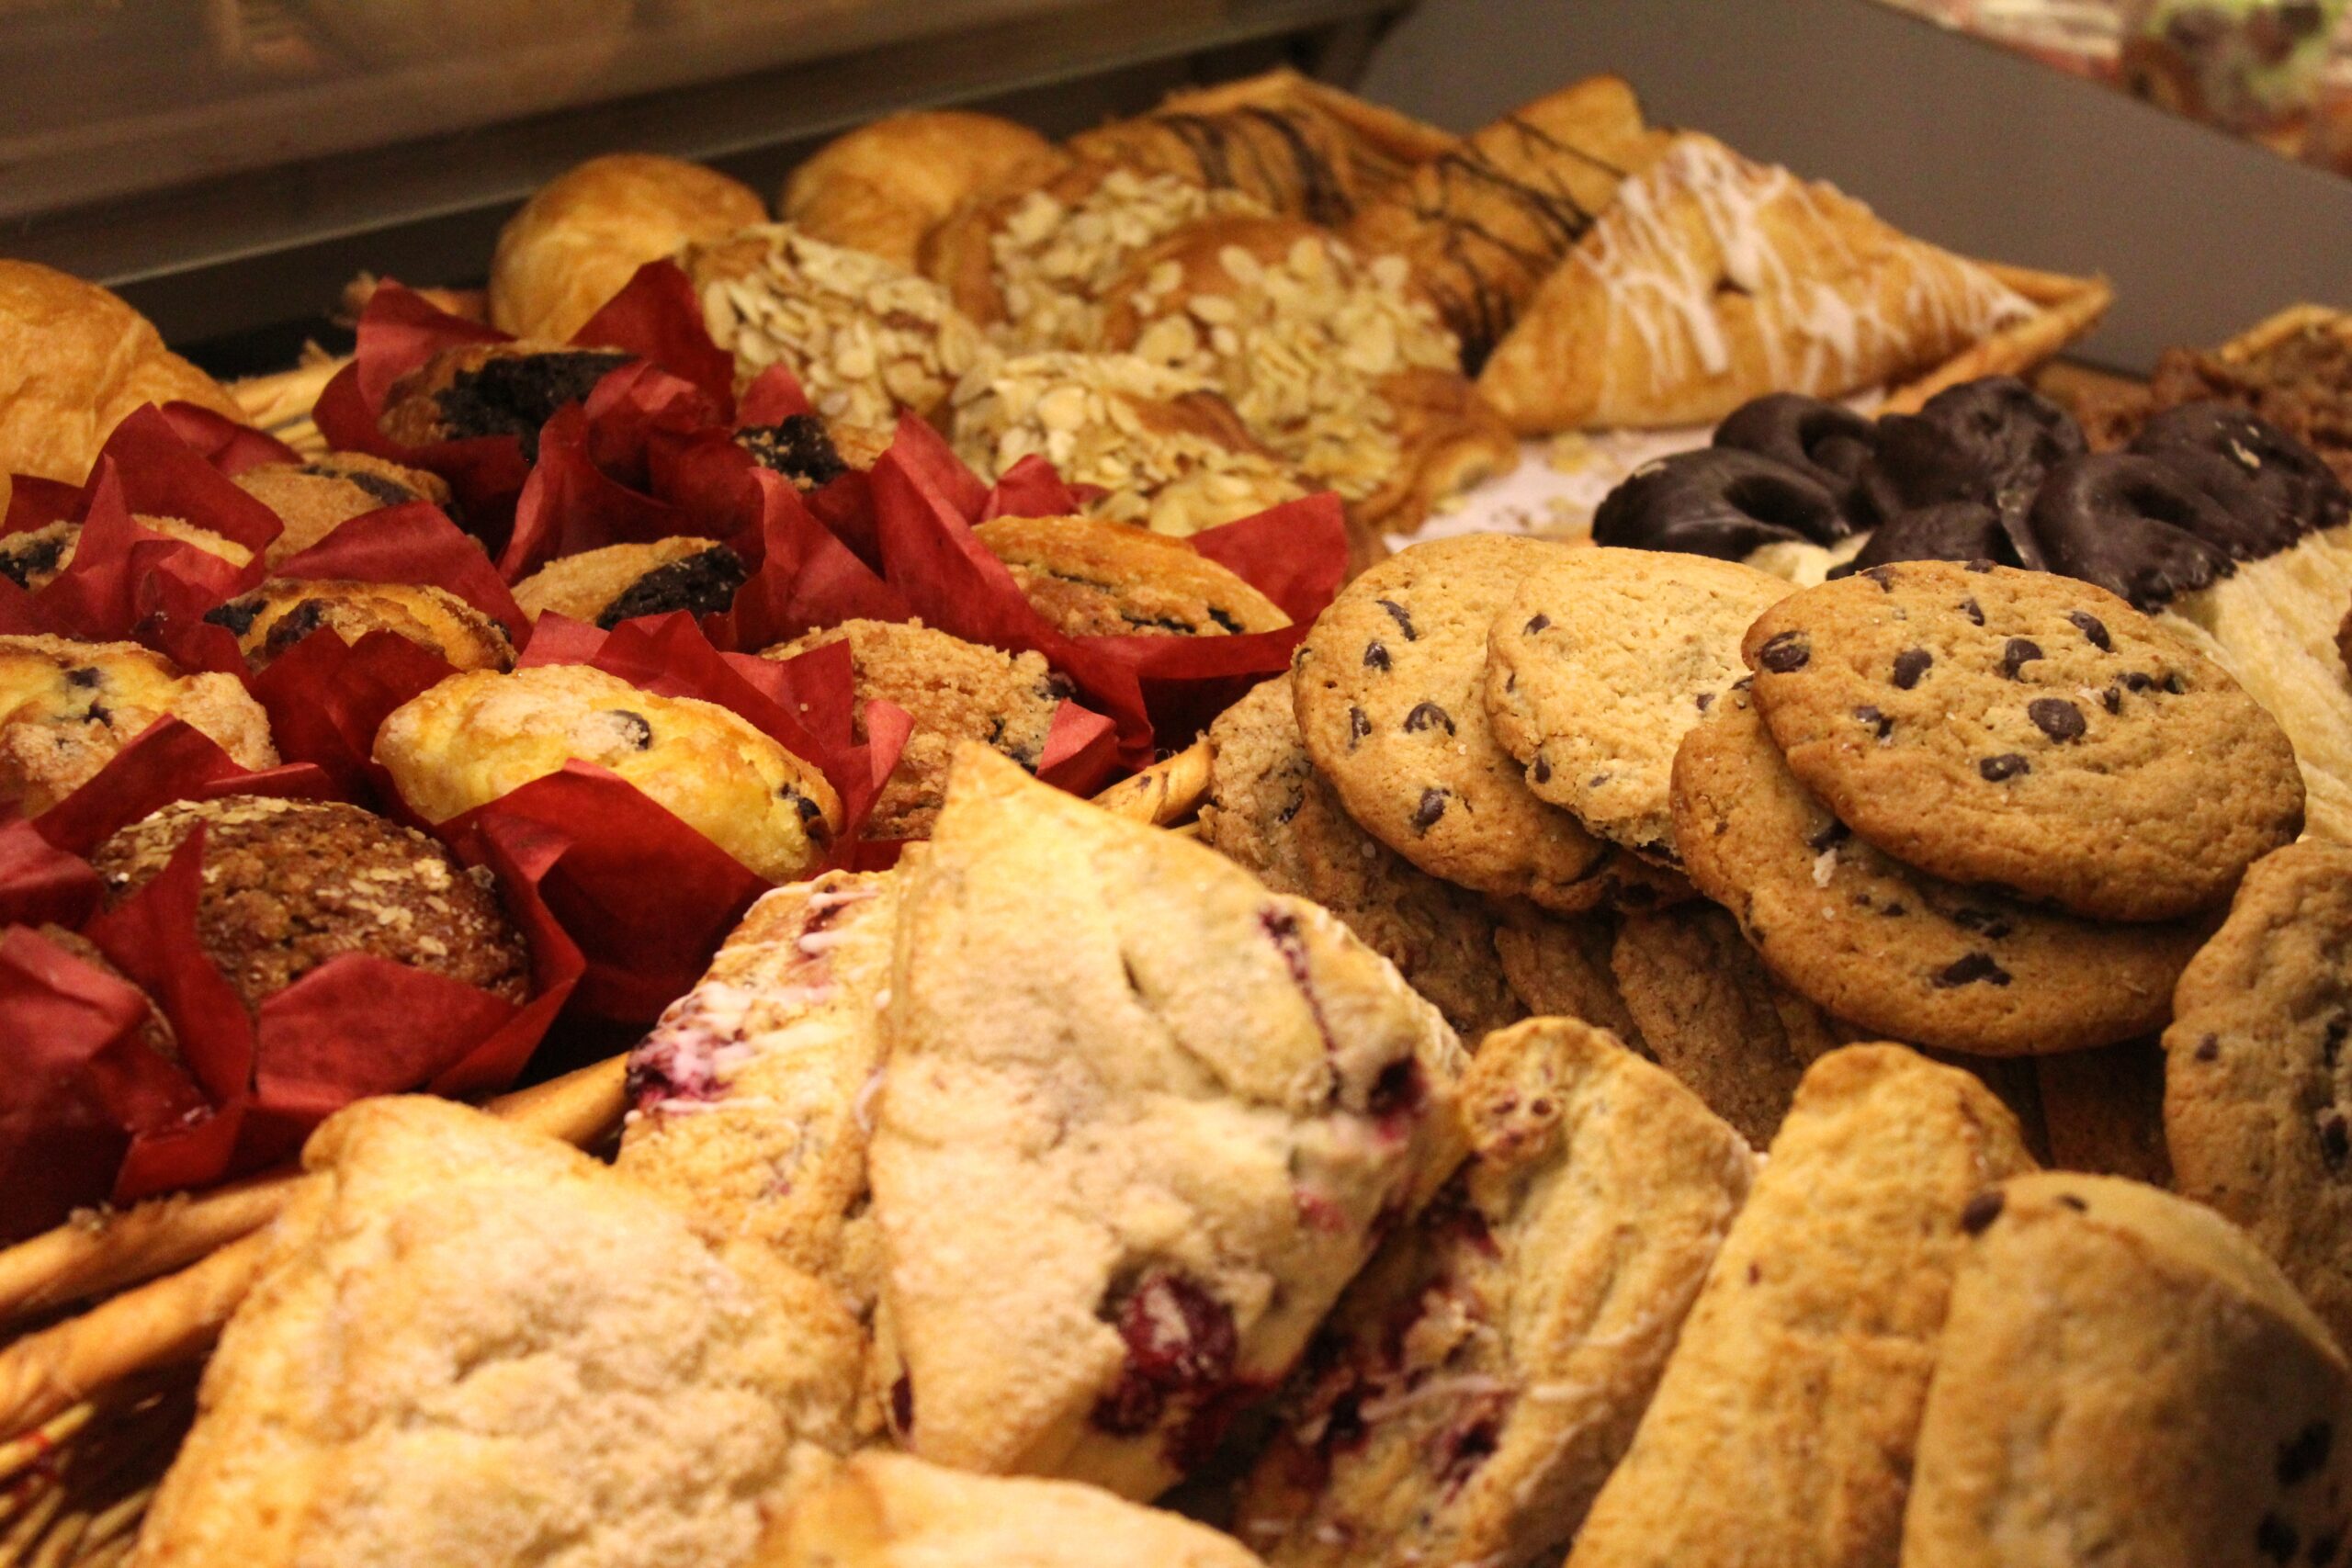 Image of various baked goods including scones, muffins, danishes, and cookies